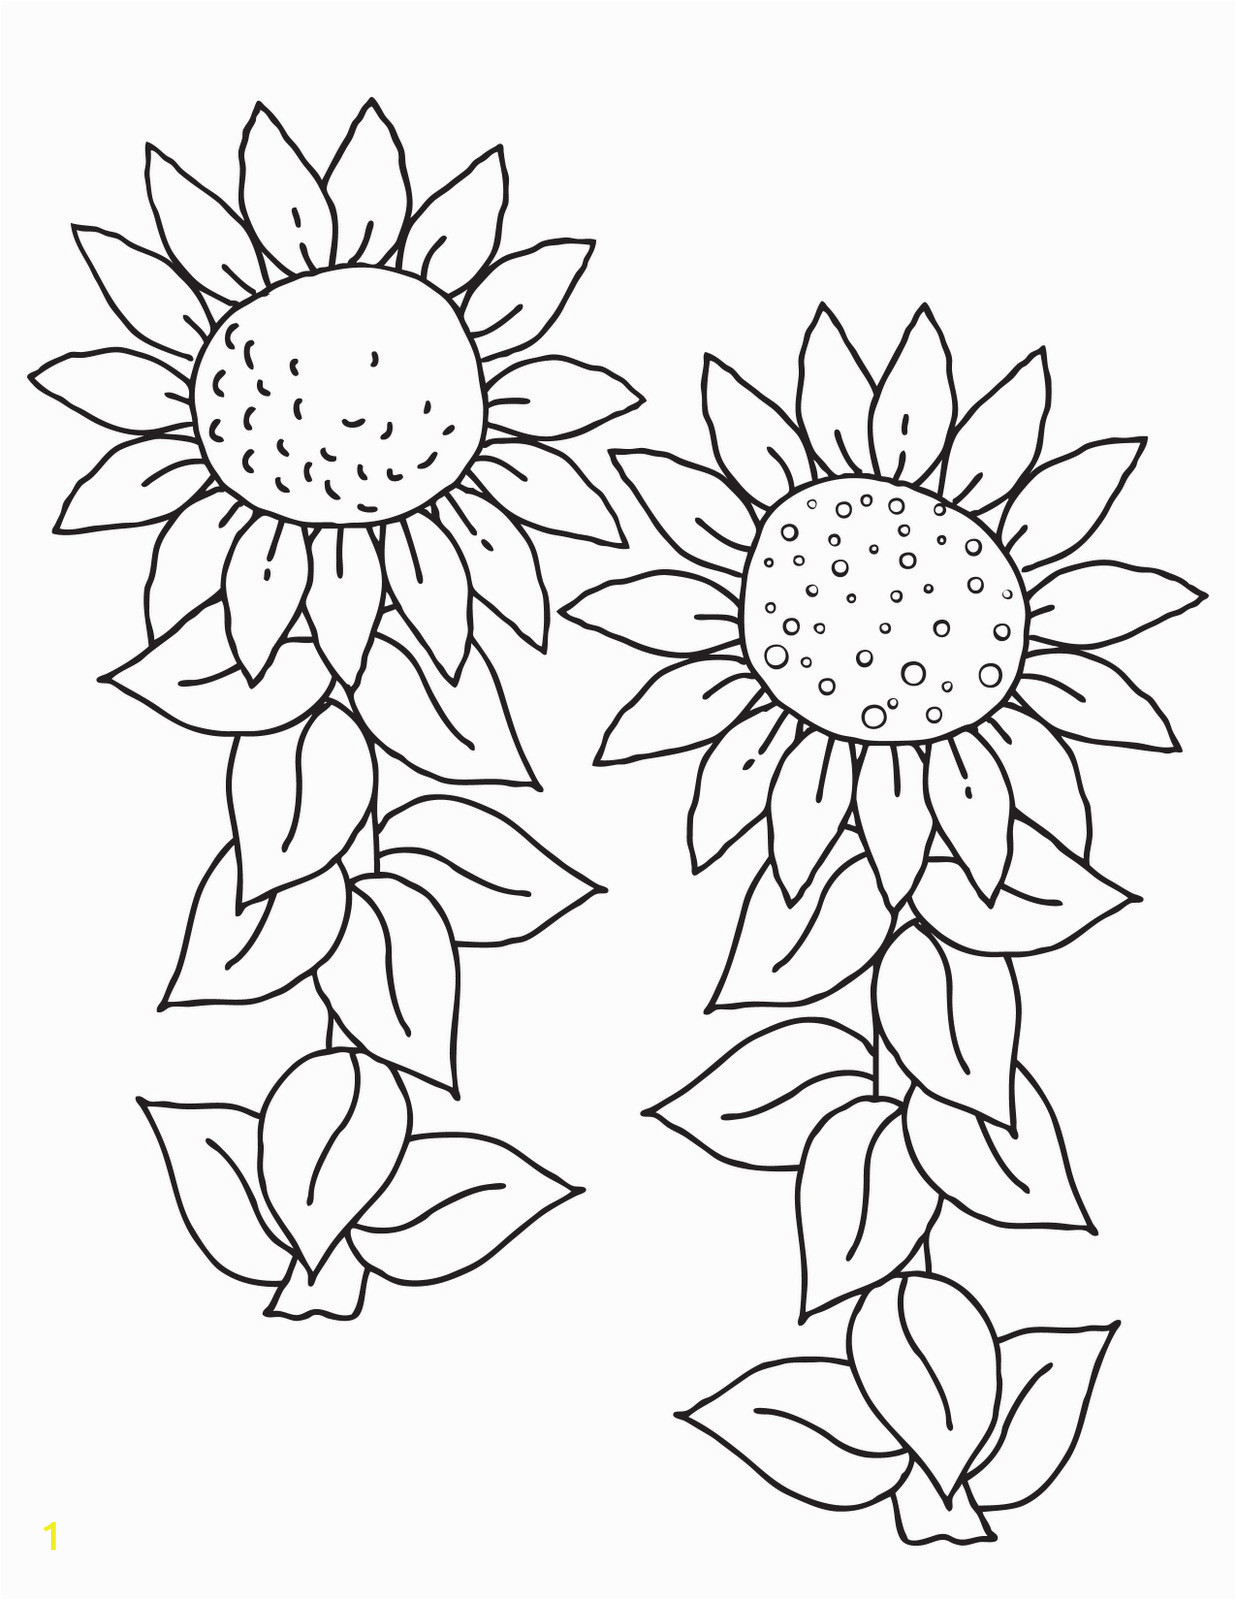 Printable Flower Coloring Pages for Kids Free Printable Sunflower Coloring Pages for Kids